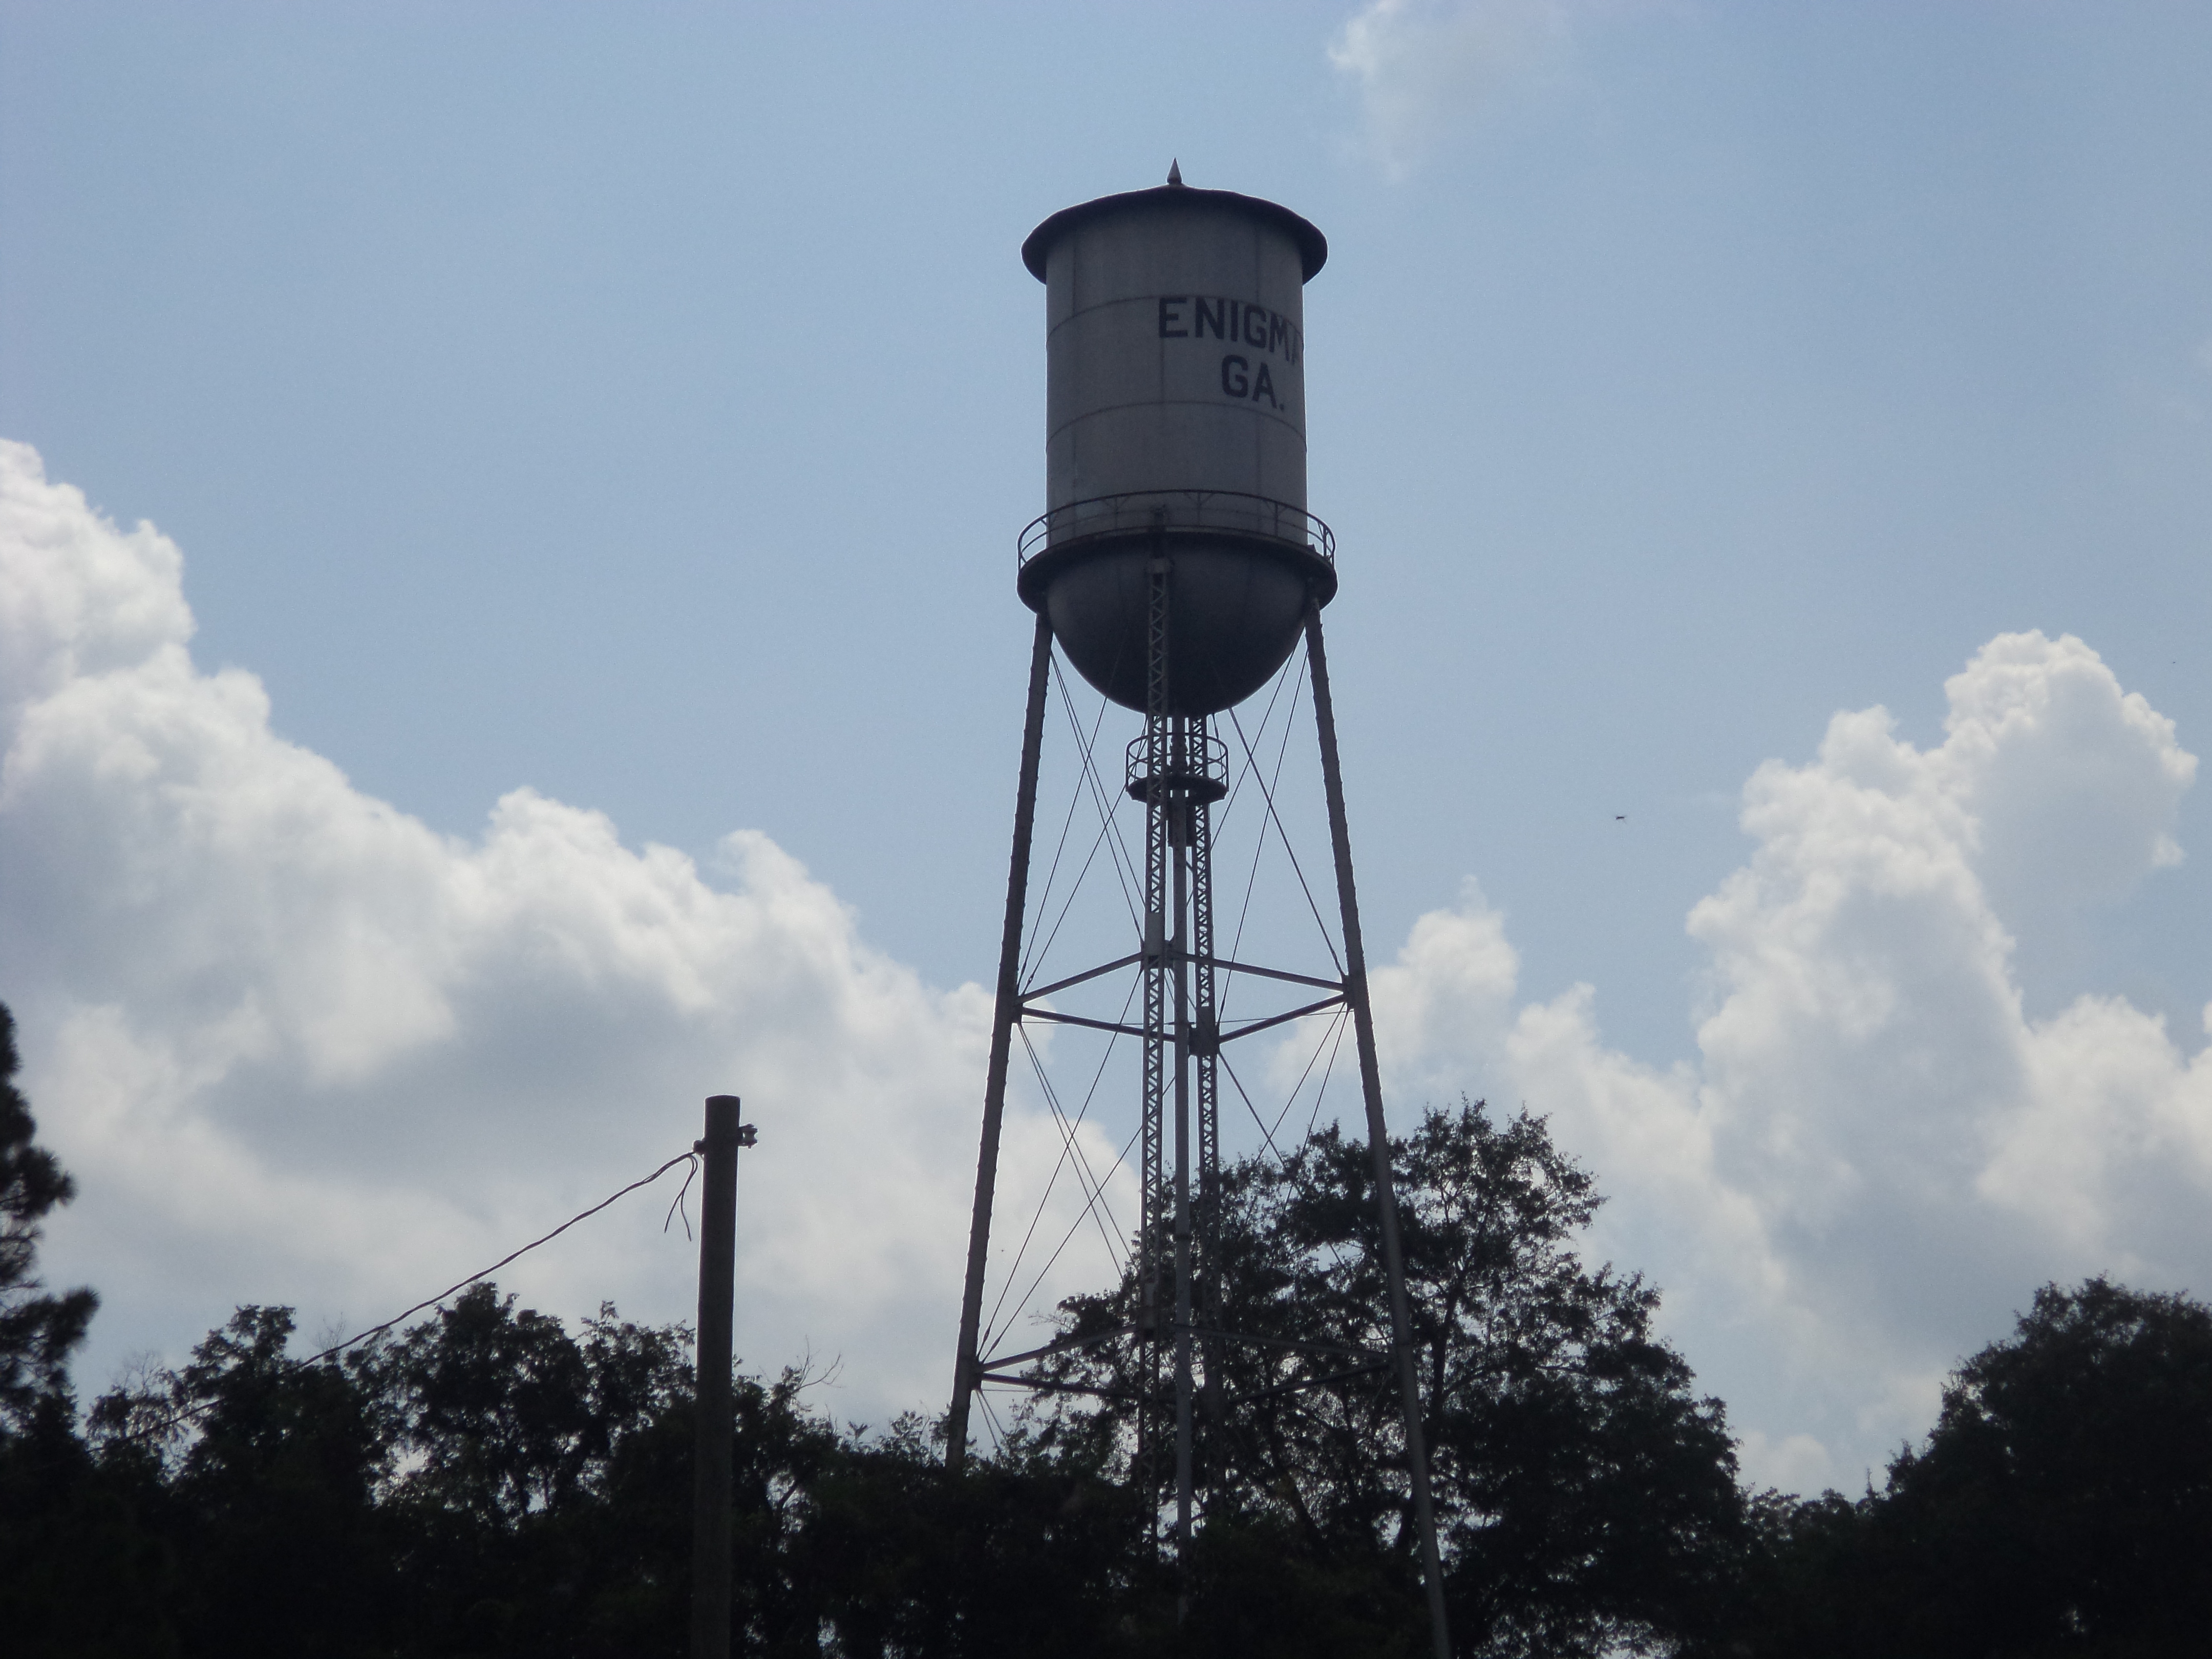 File:Enigma Old Water Tower.JPG - Wikimedia Commons